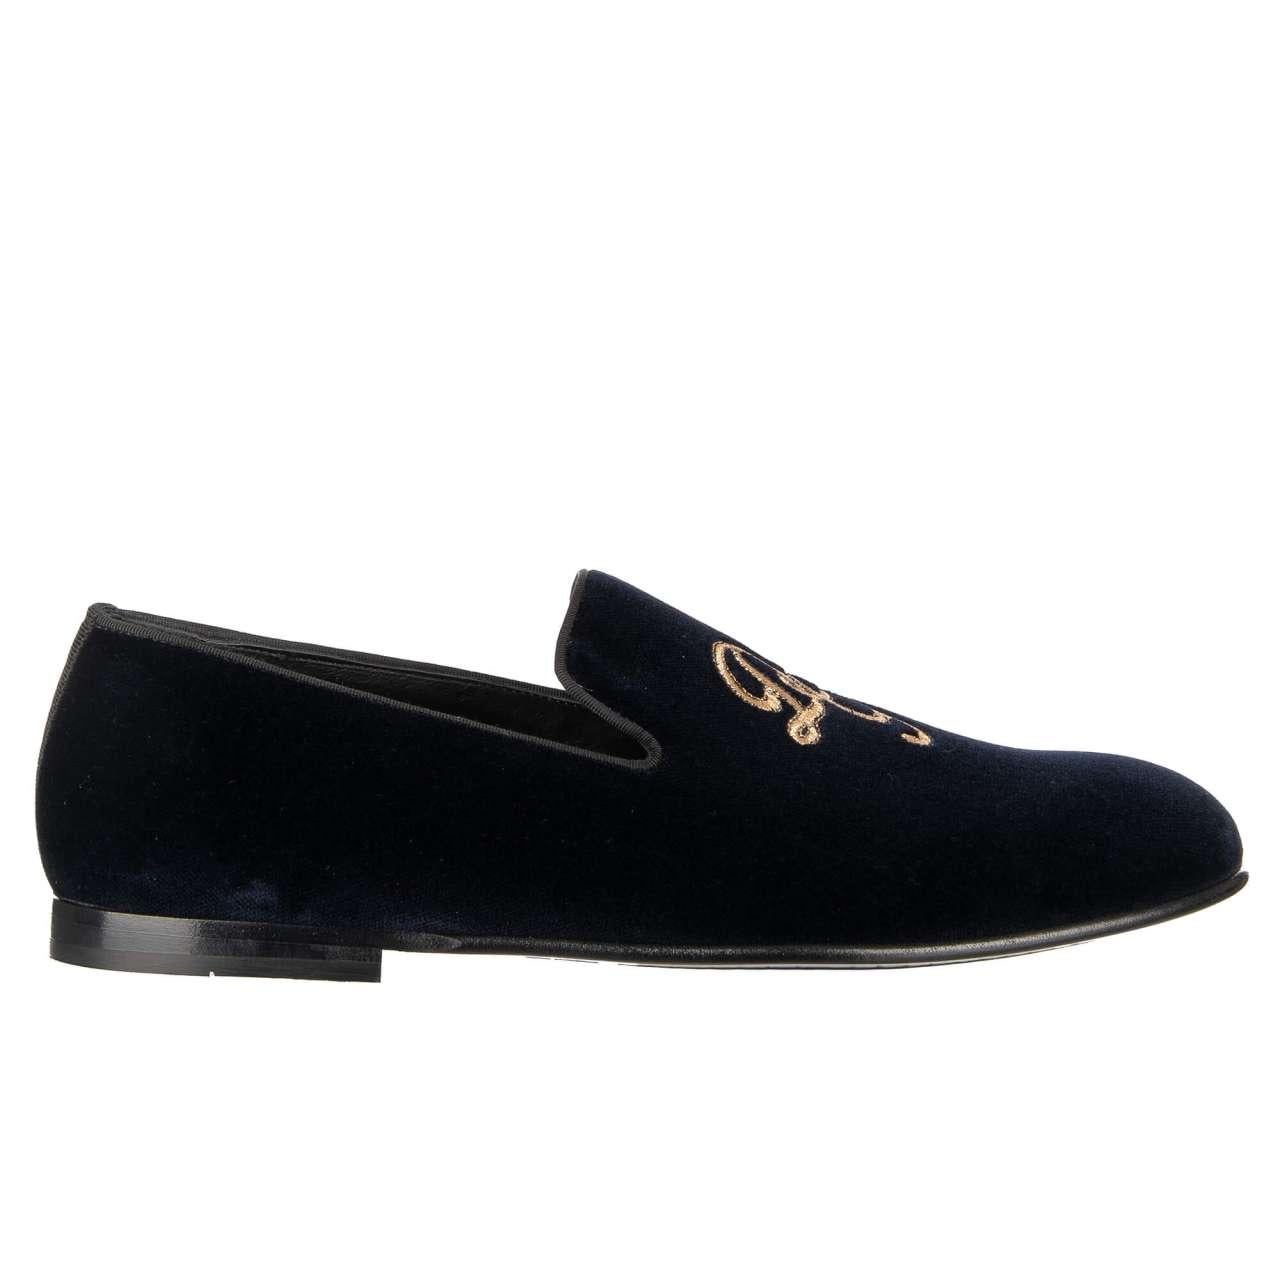 - Velvet loafer shoes AMALFI with embroidered golden DG logo in navy blue by DOLCE & GABBANA - MADE IN ITALY - Former RRP: EUR 595 - New with Box - Model: A50335-B9L43-80653 - Material: 89% Cotton, 10% Viscose, 1% Elastan - Sole: Leather - Color: